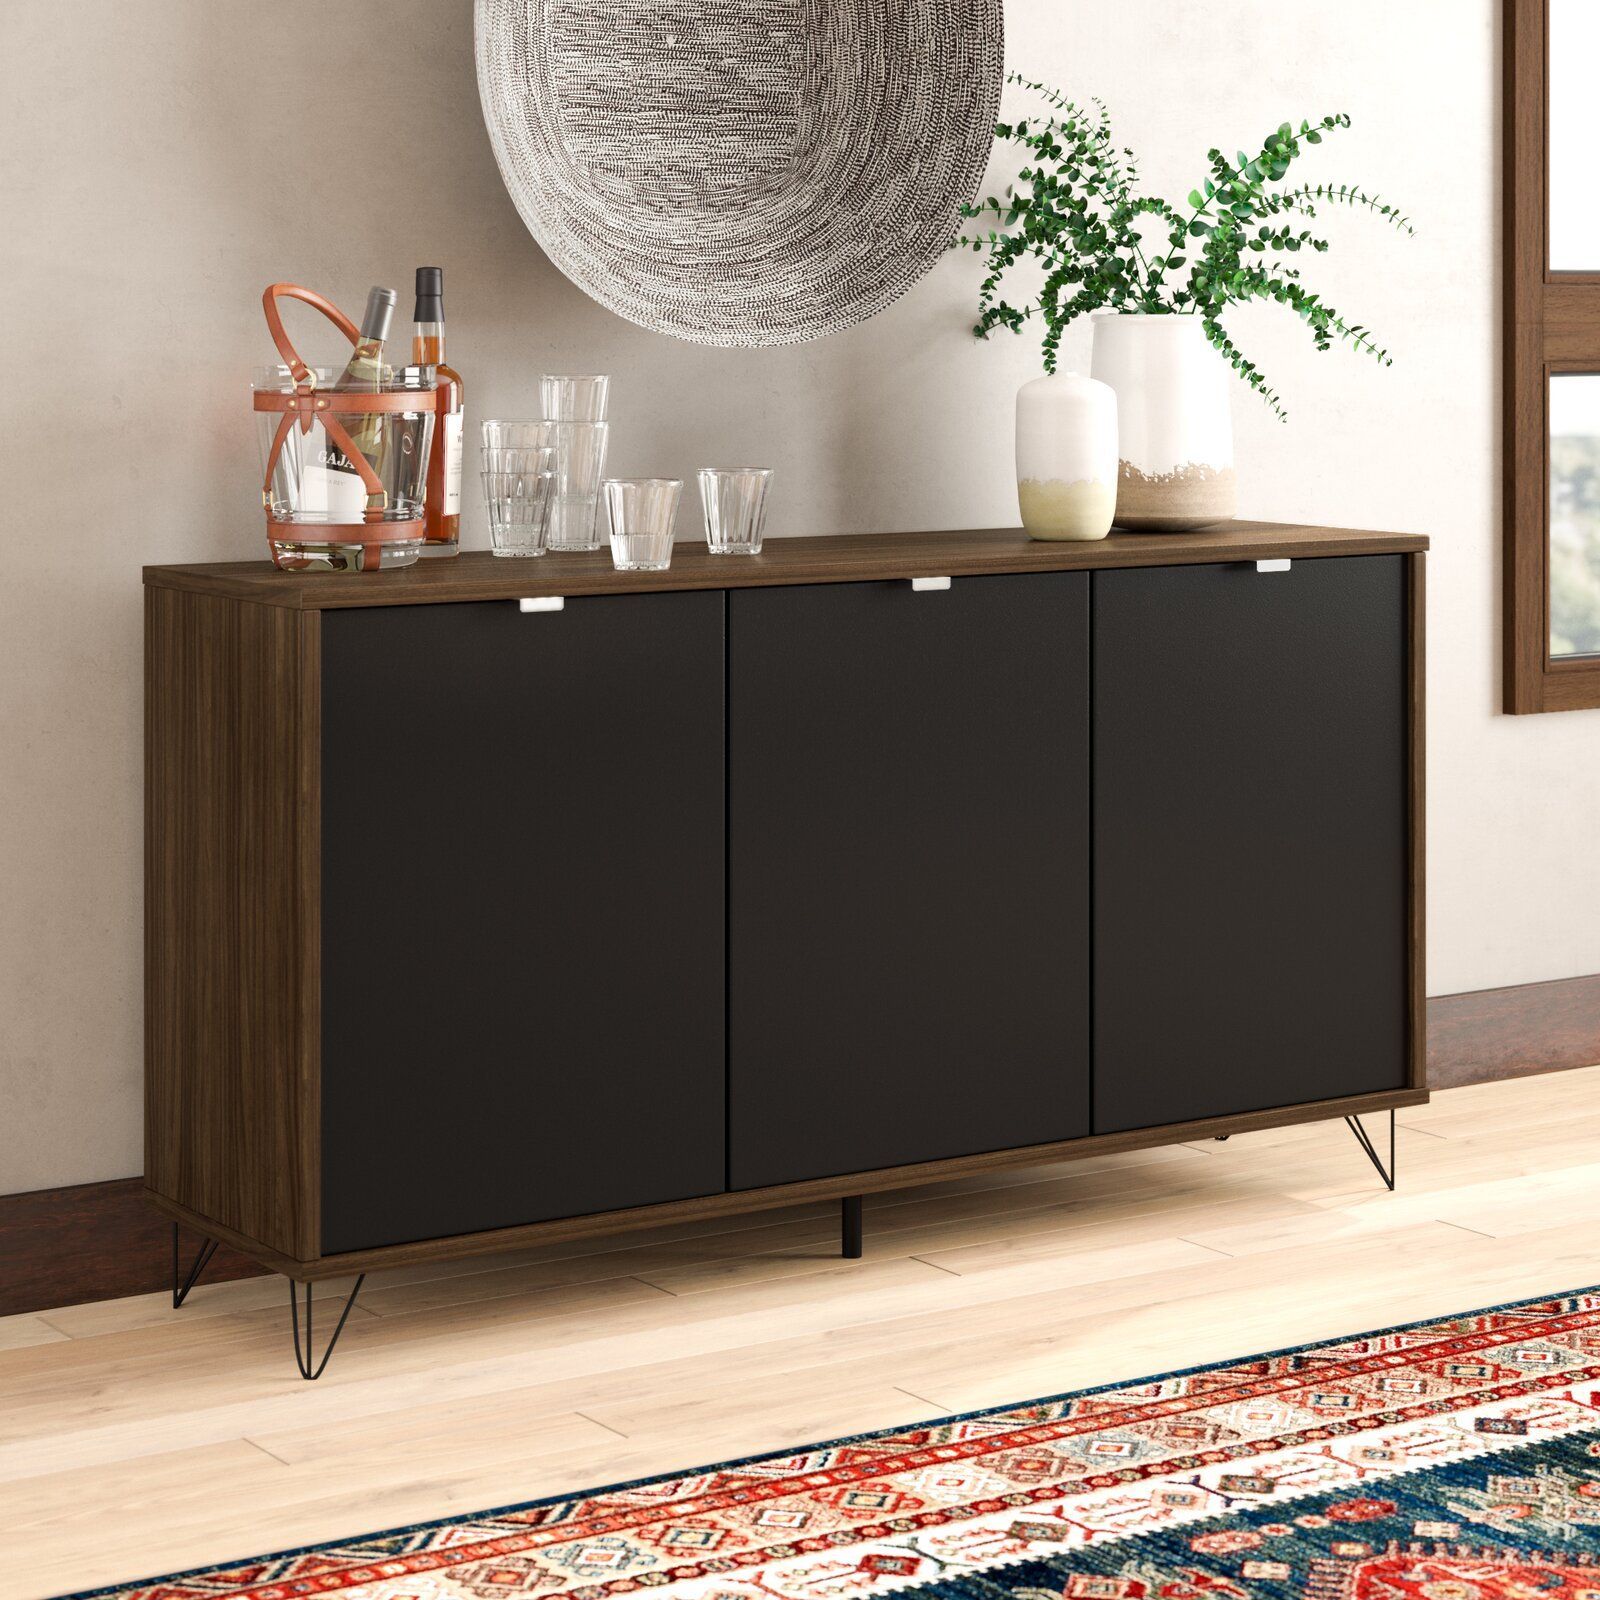 Ipswich Sideboard | Modern Sideboard, Sideboard Console Intended For Ipswich  (View 1 of 1)